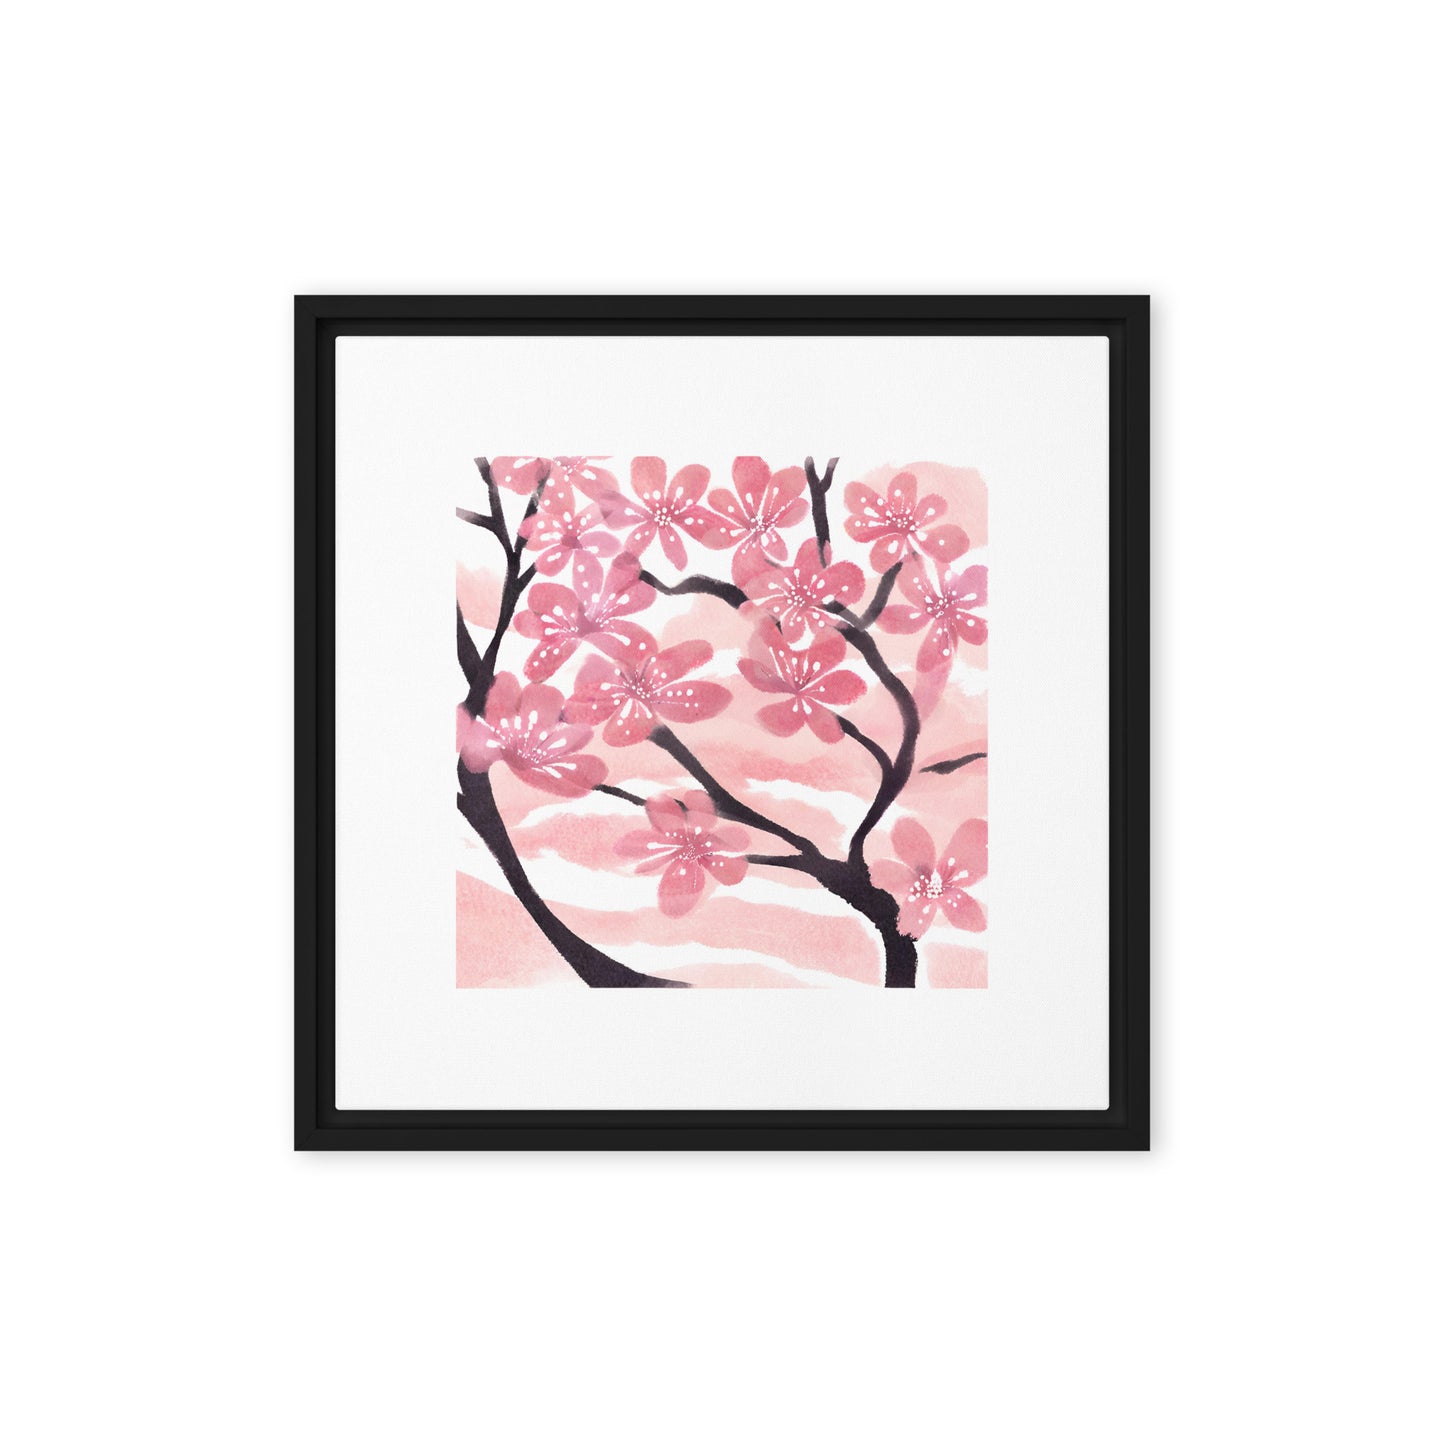 Cherry blossoms - Framed canvas